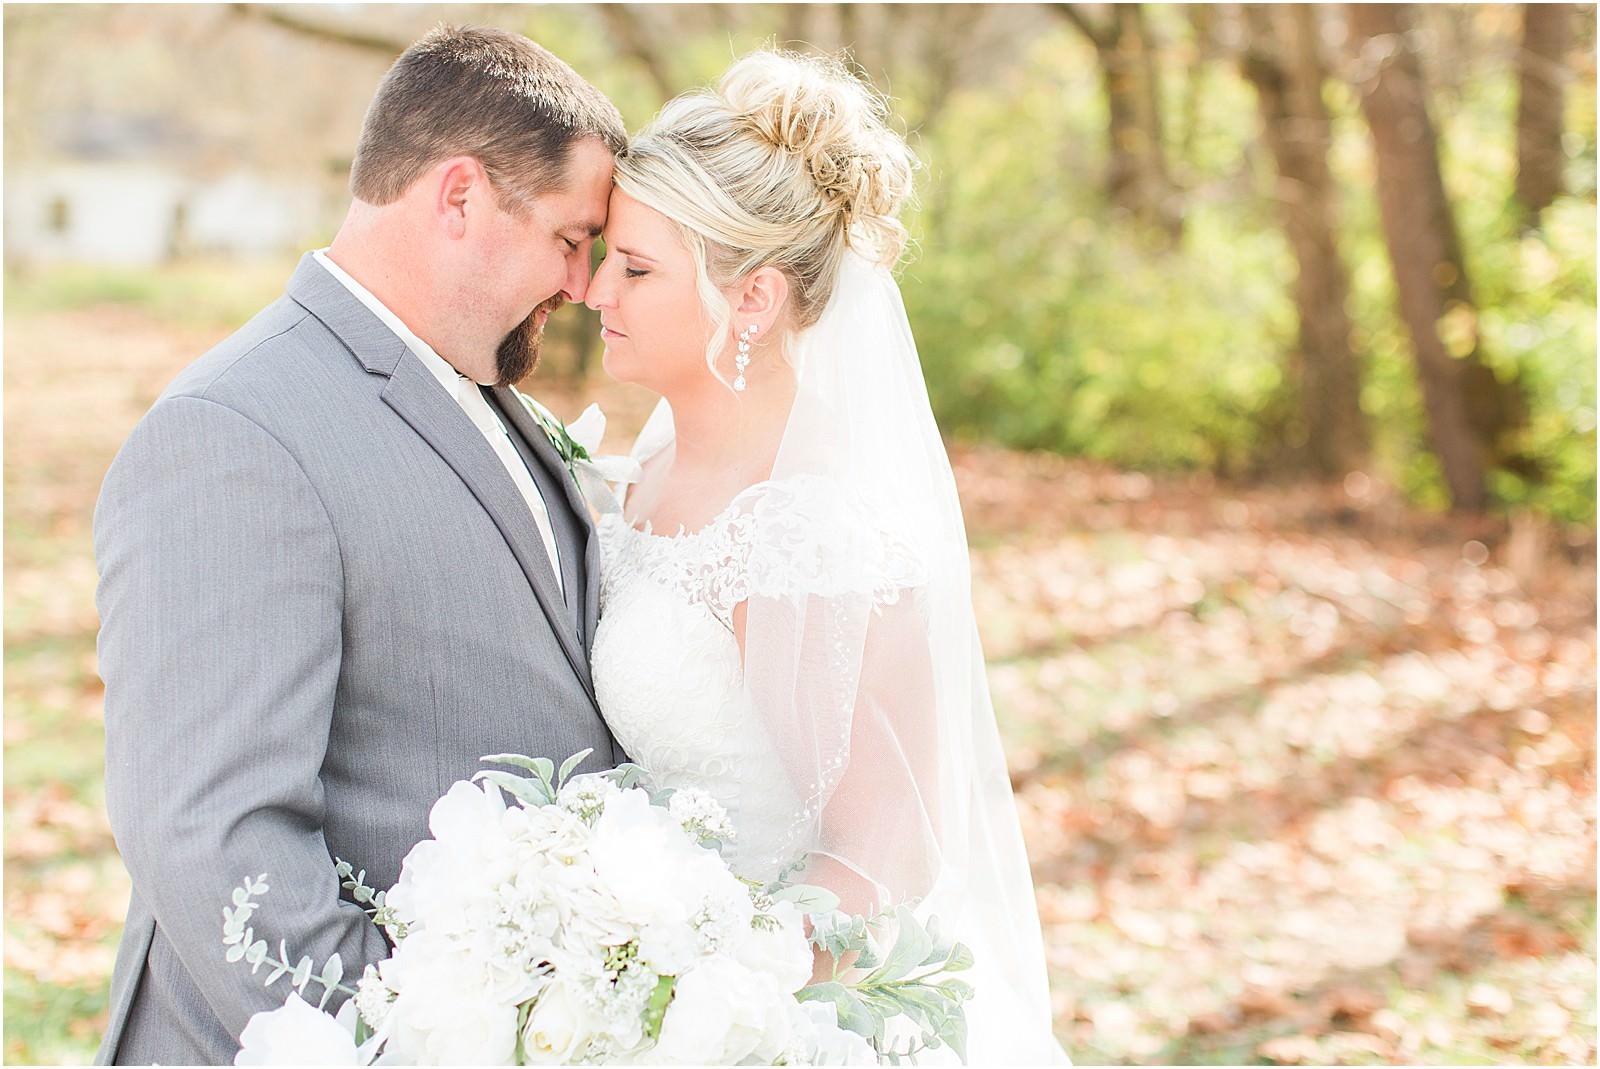 A Navy and Blush Wedding in Tell City Indiana | Brianna and Matt | Bret and Brandie Photography 0095.jpg